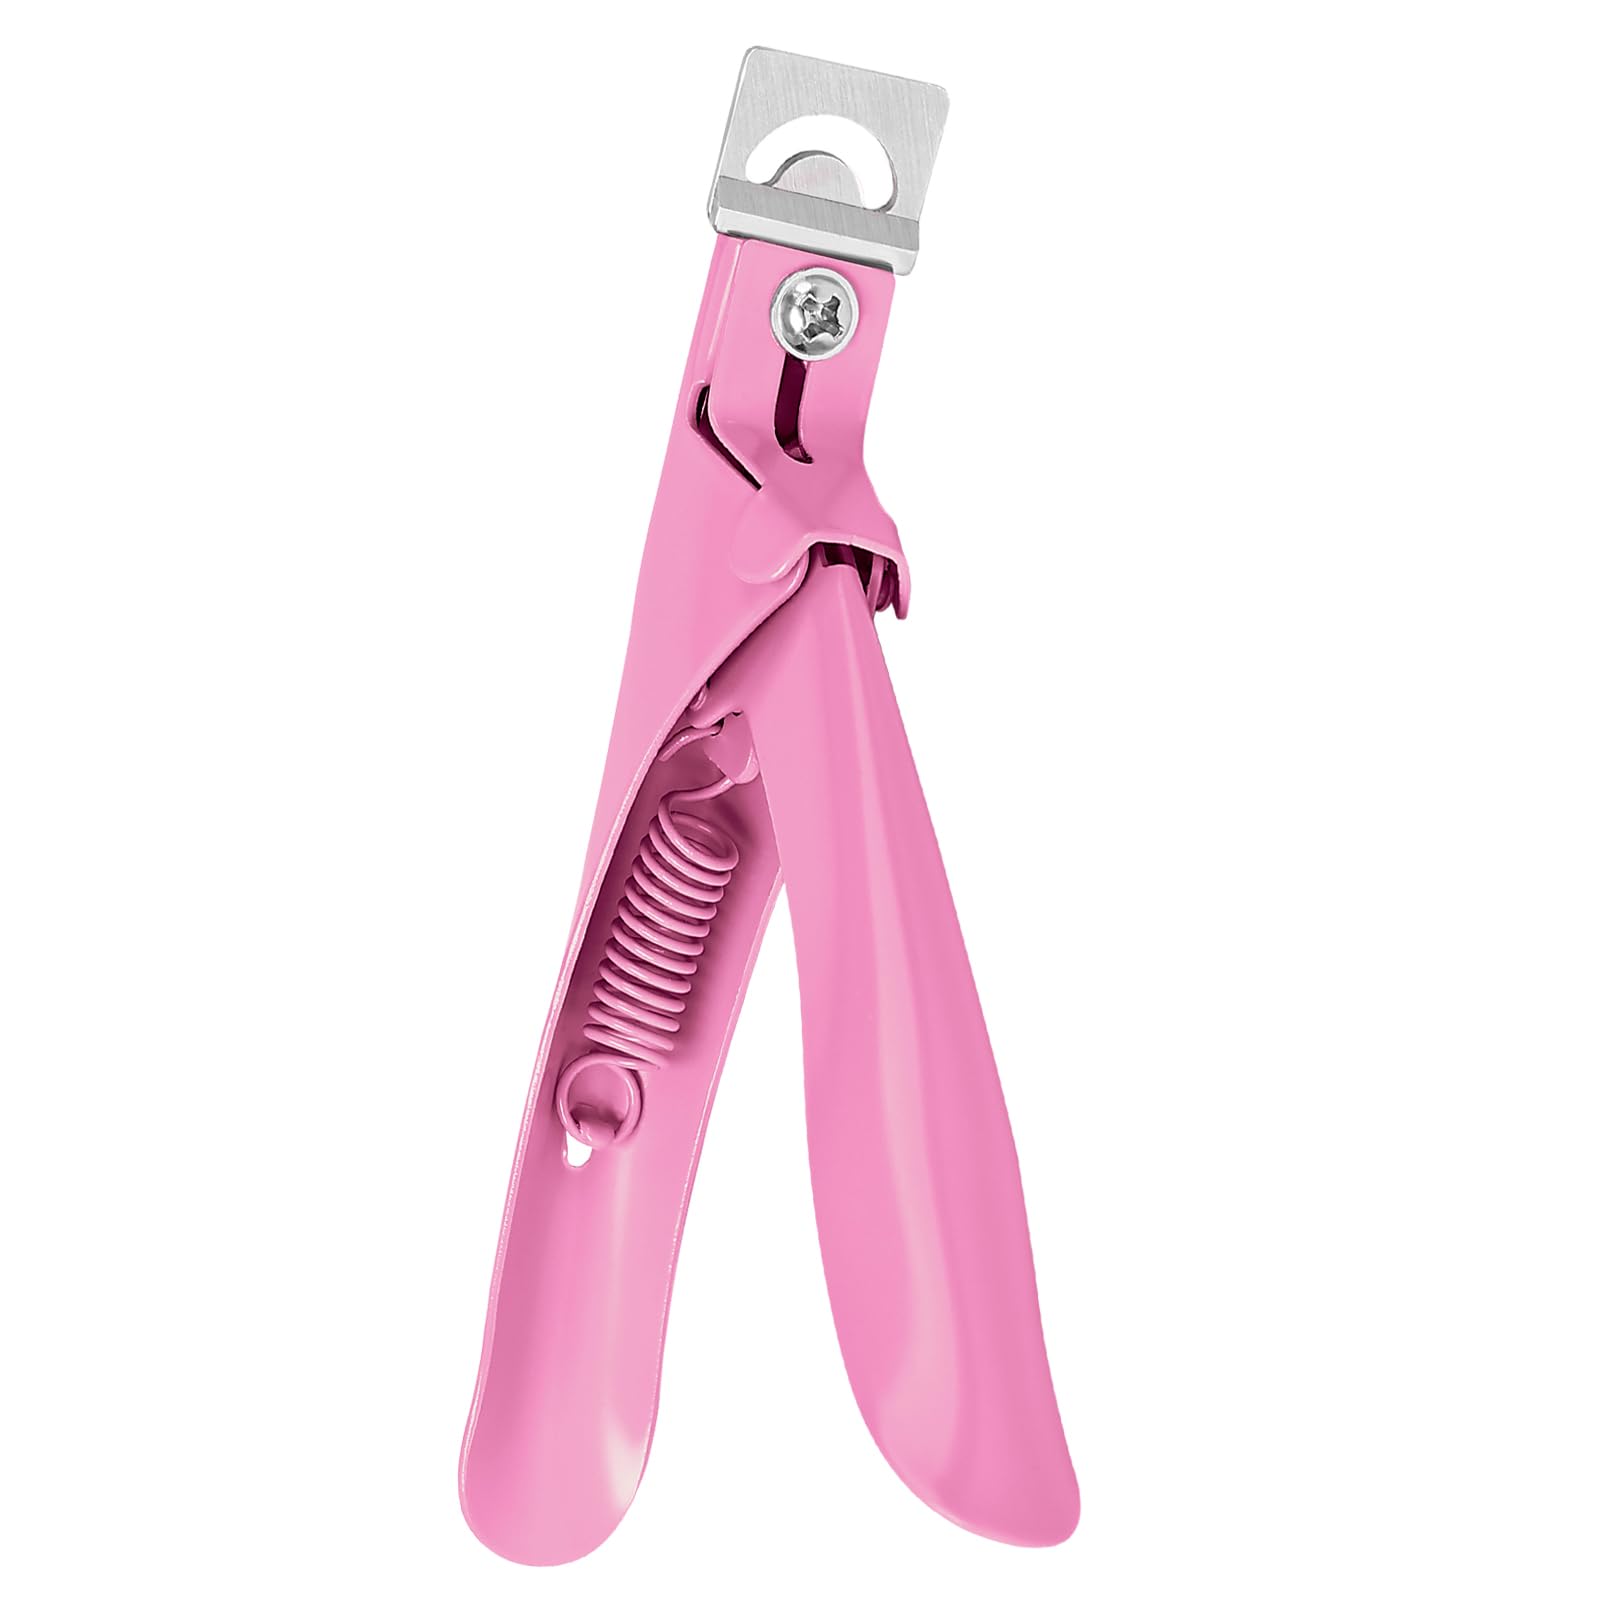 Stainless Steel Edge Cutter - Pink